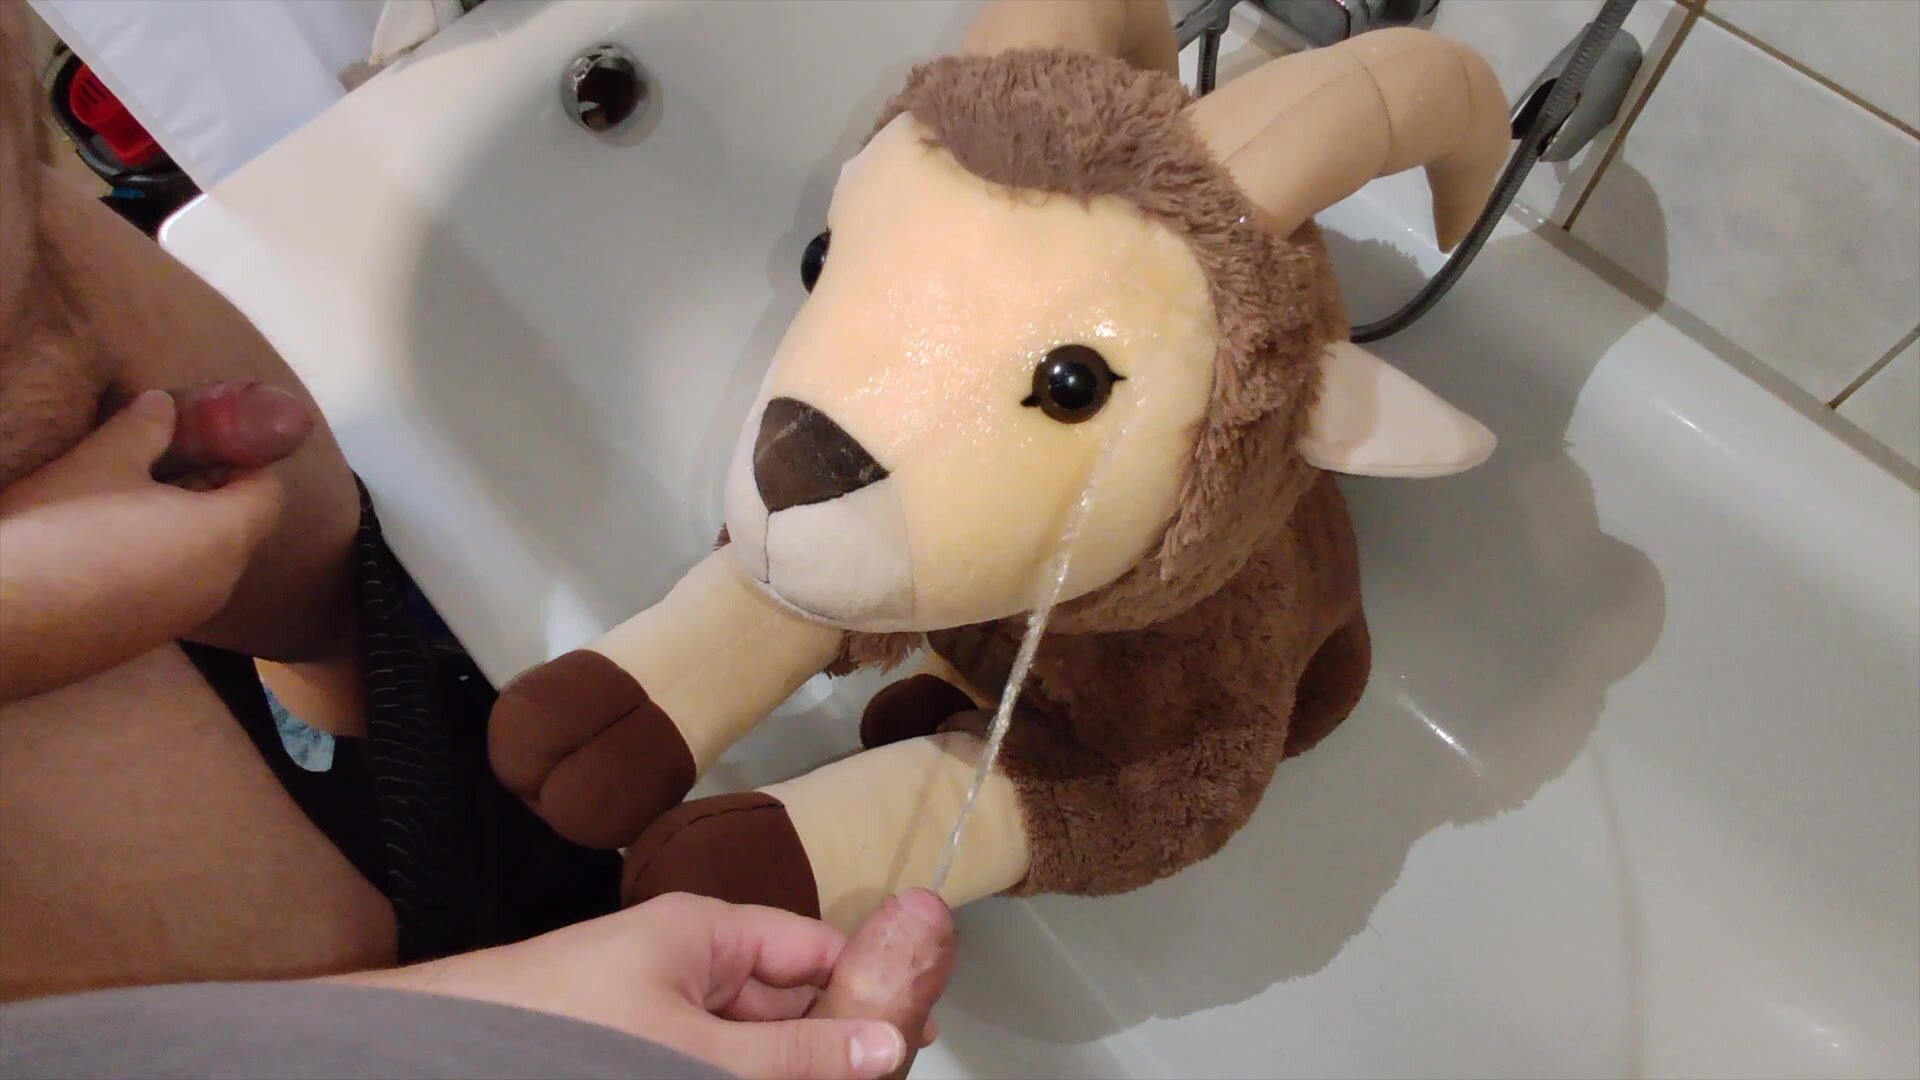 Pissing on a goat plushie with a friend